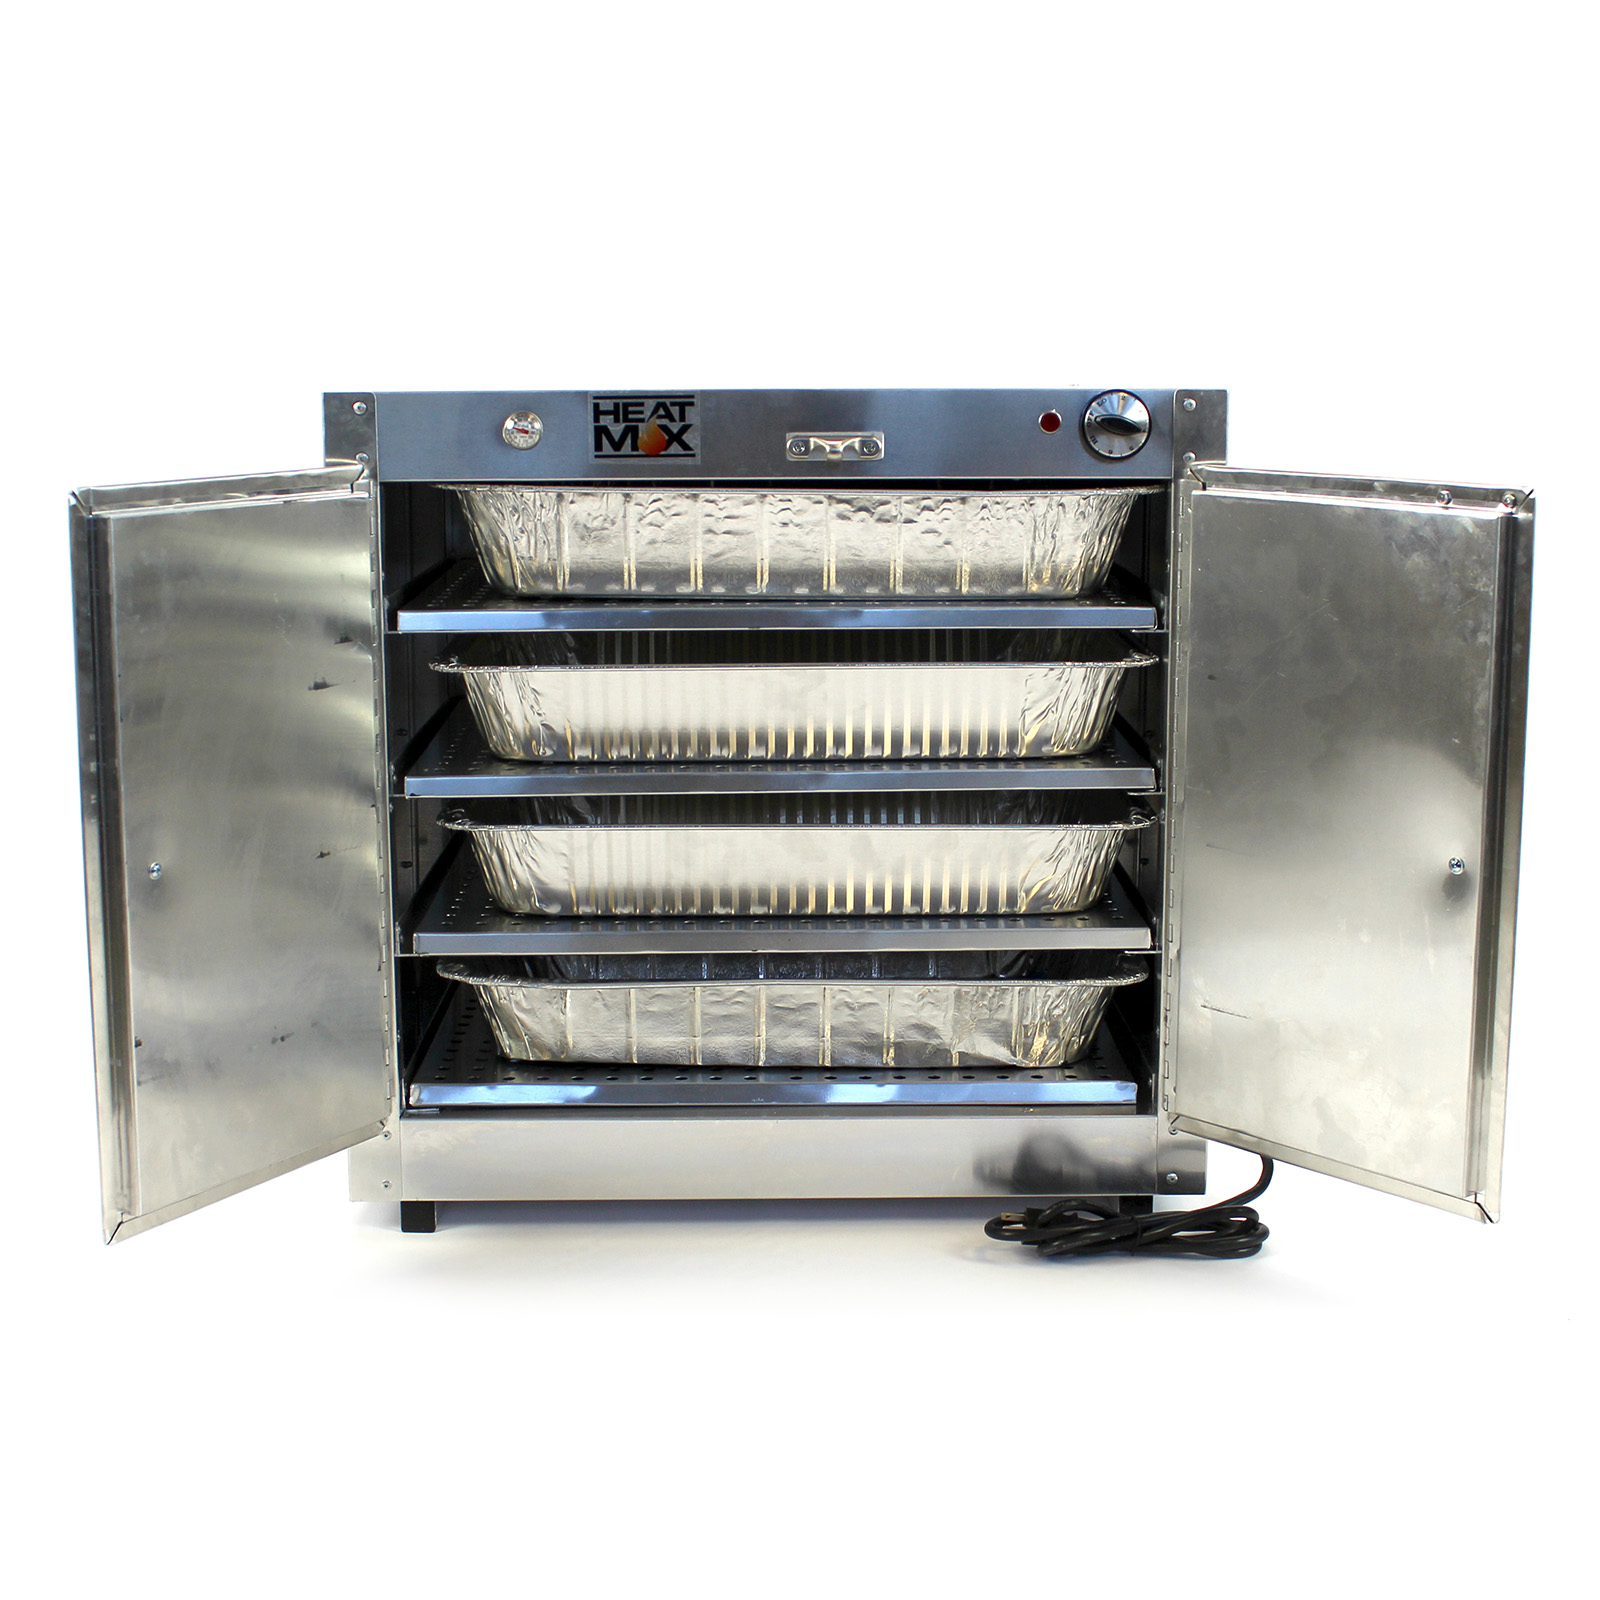 HeatMax 25x15x24 Commercial Hot Box Catering Food Warmer, Hot Food, Pizza,  Pastry, Empanada, Patty, Concession, Heated Case